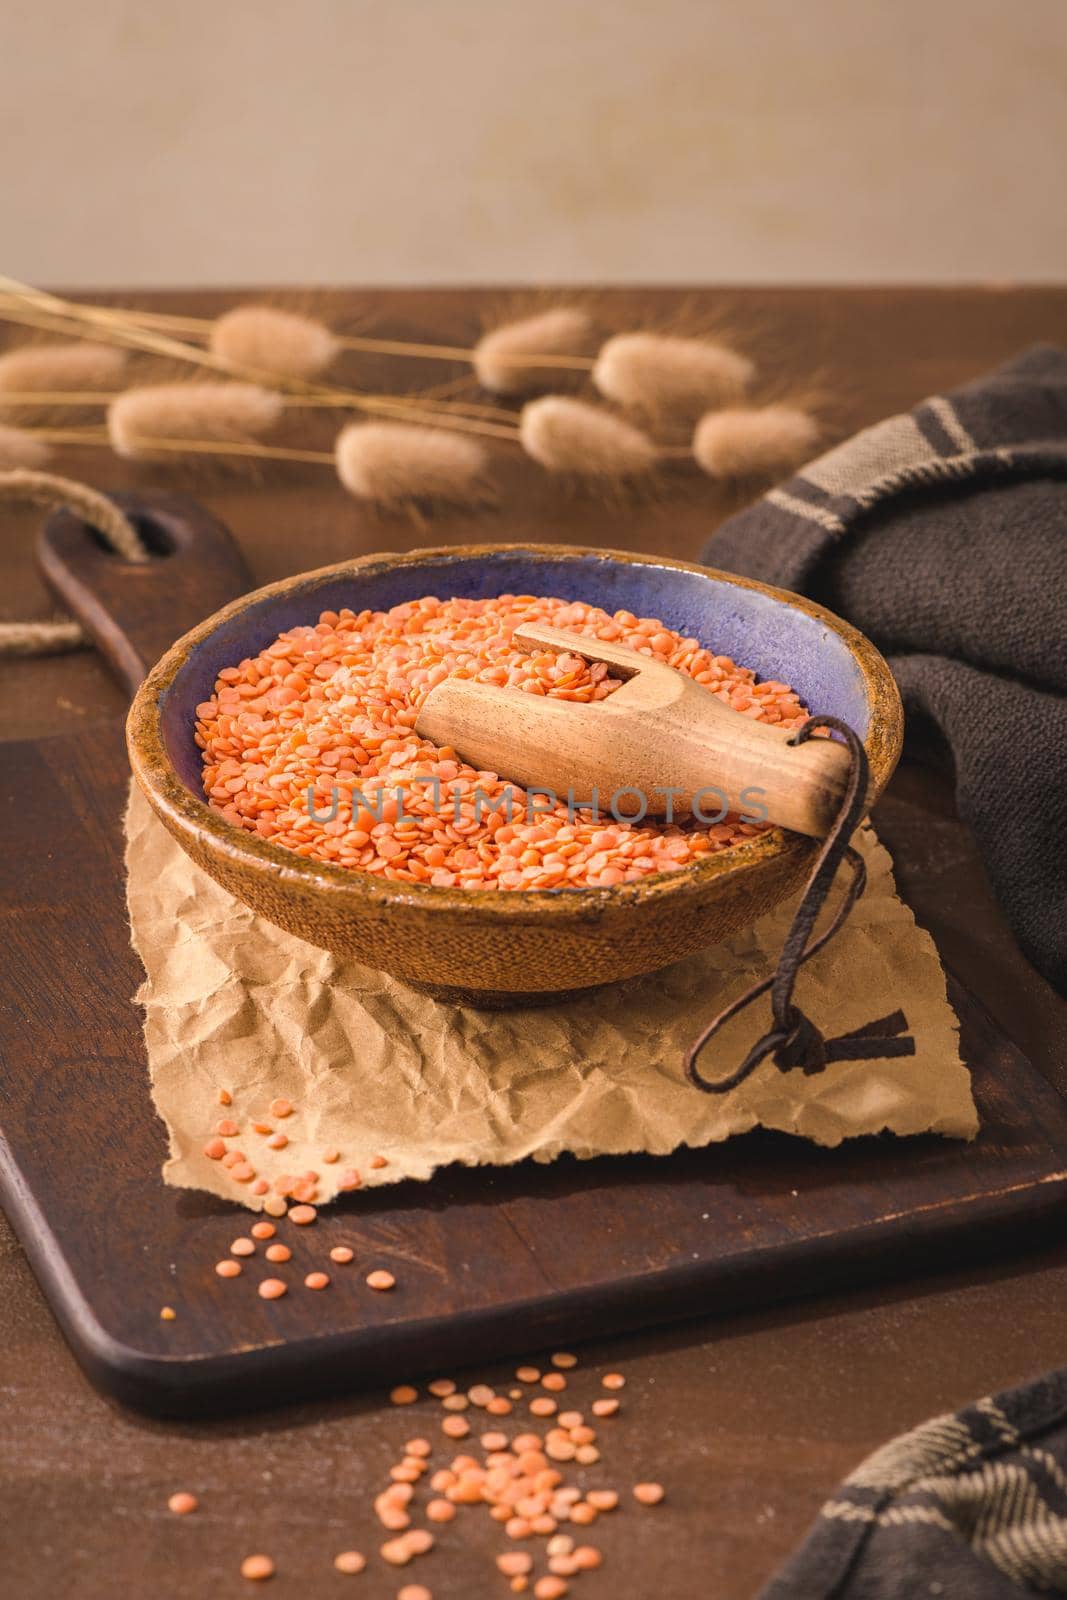 Red lentils in a ceramic bowl by homydesign